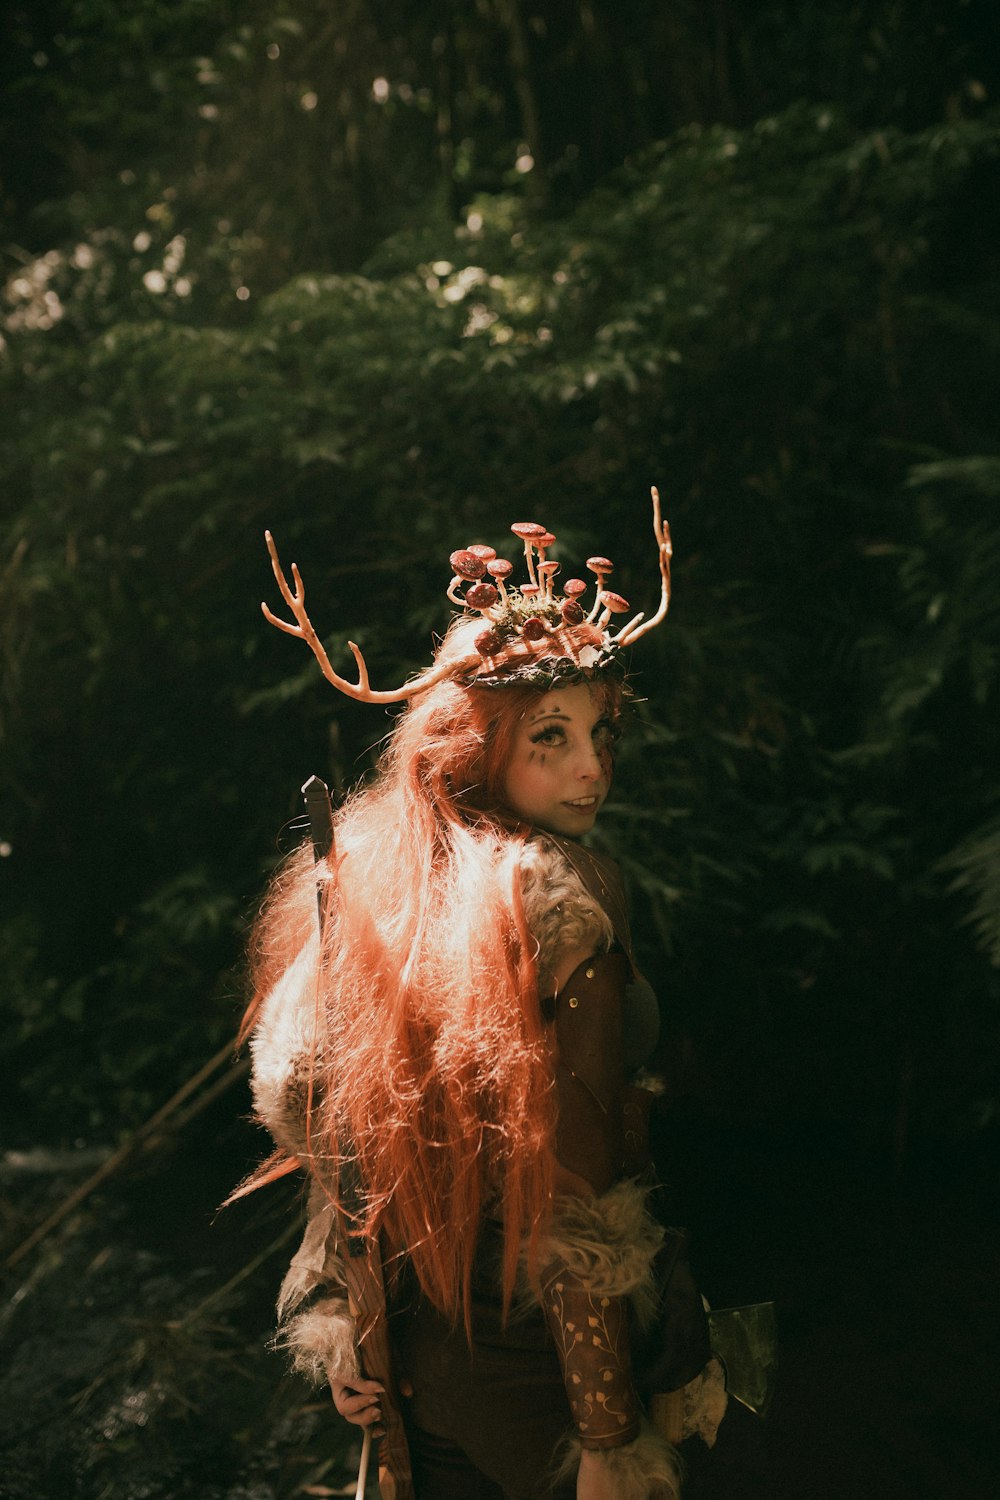 a woman with long red hair wearing a deer costume